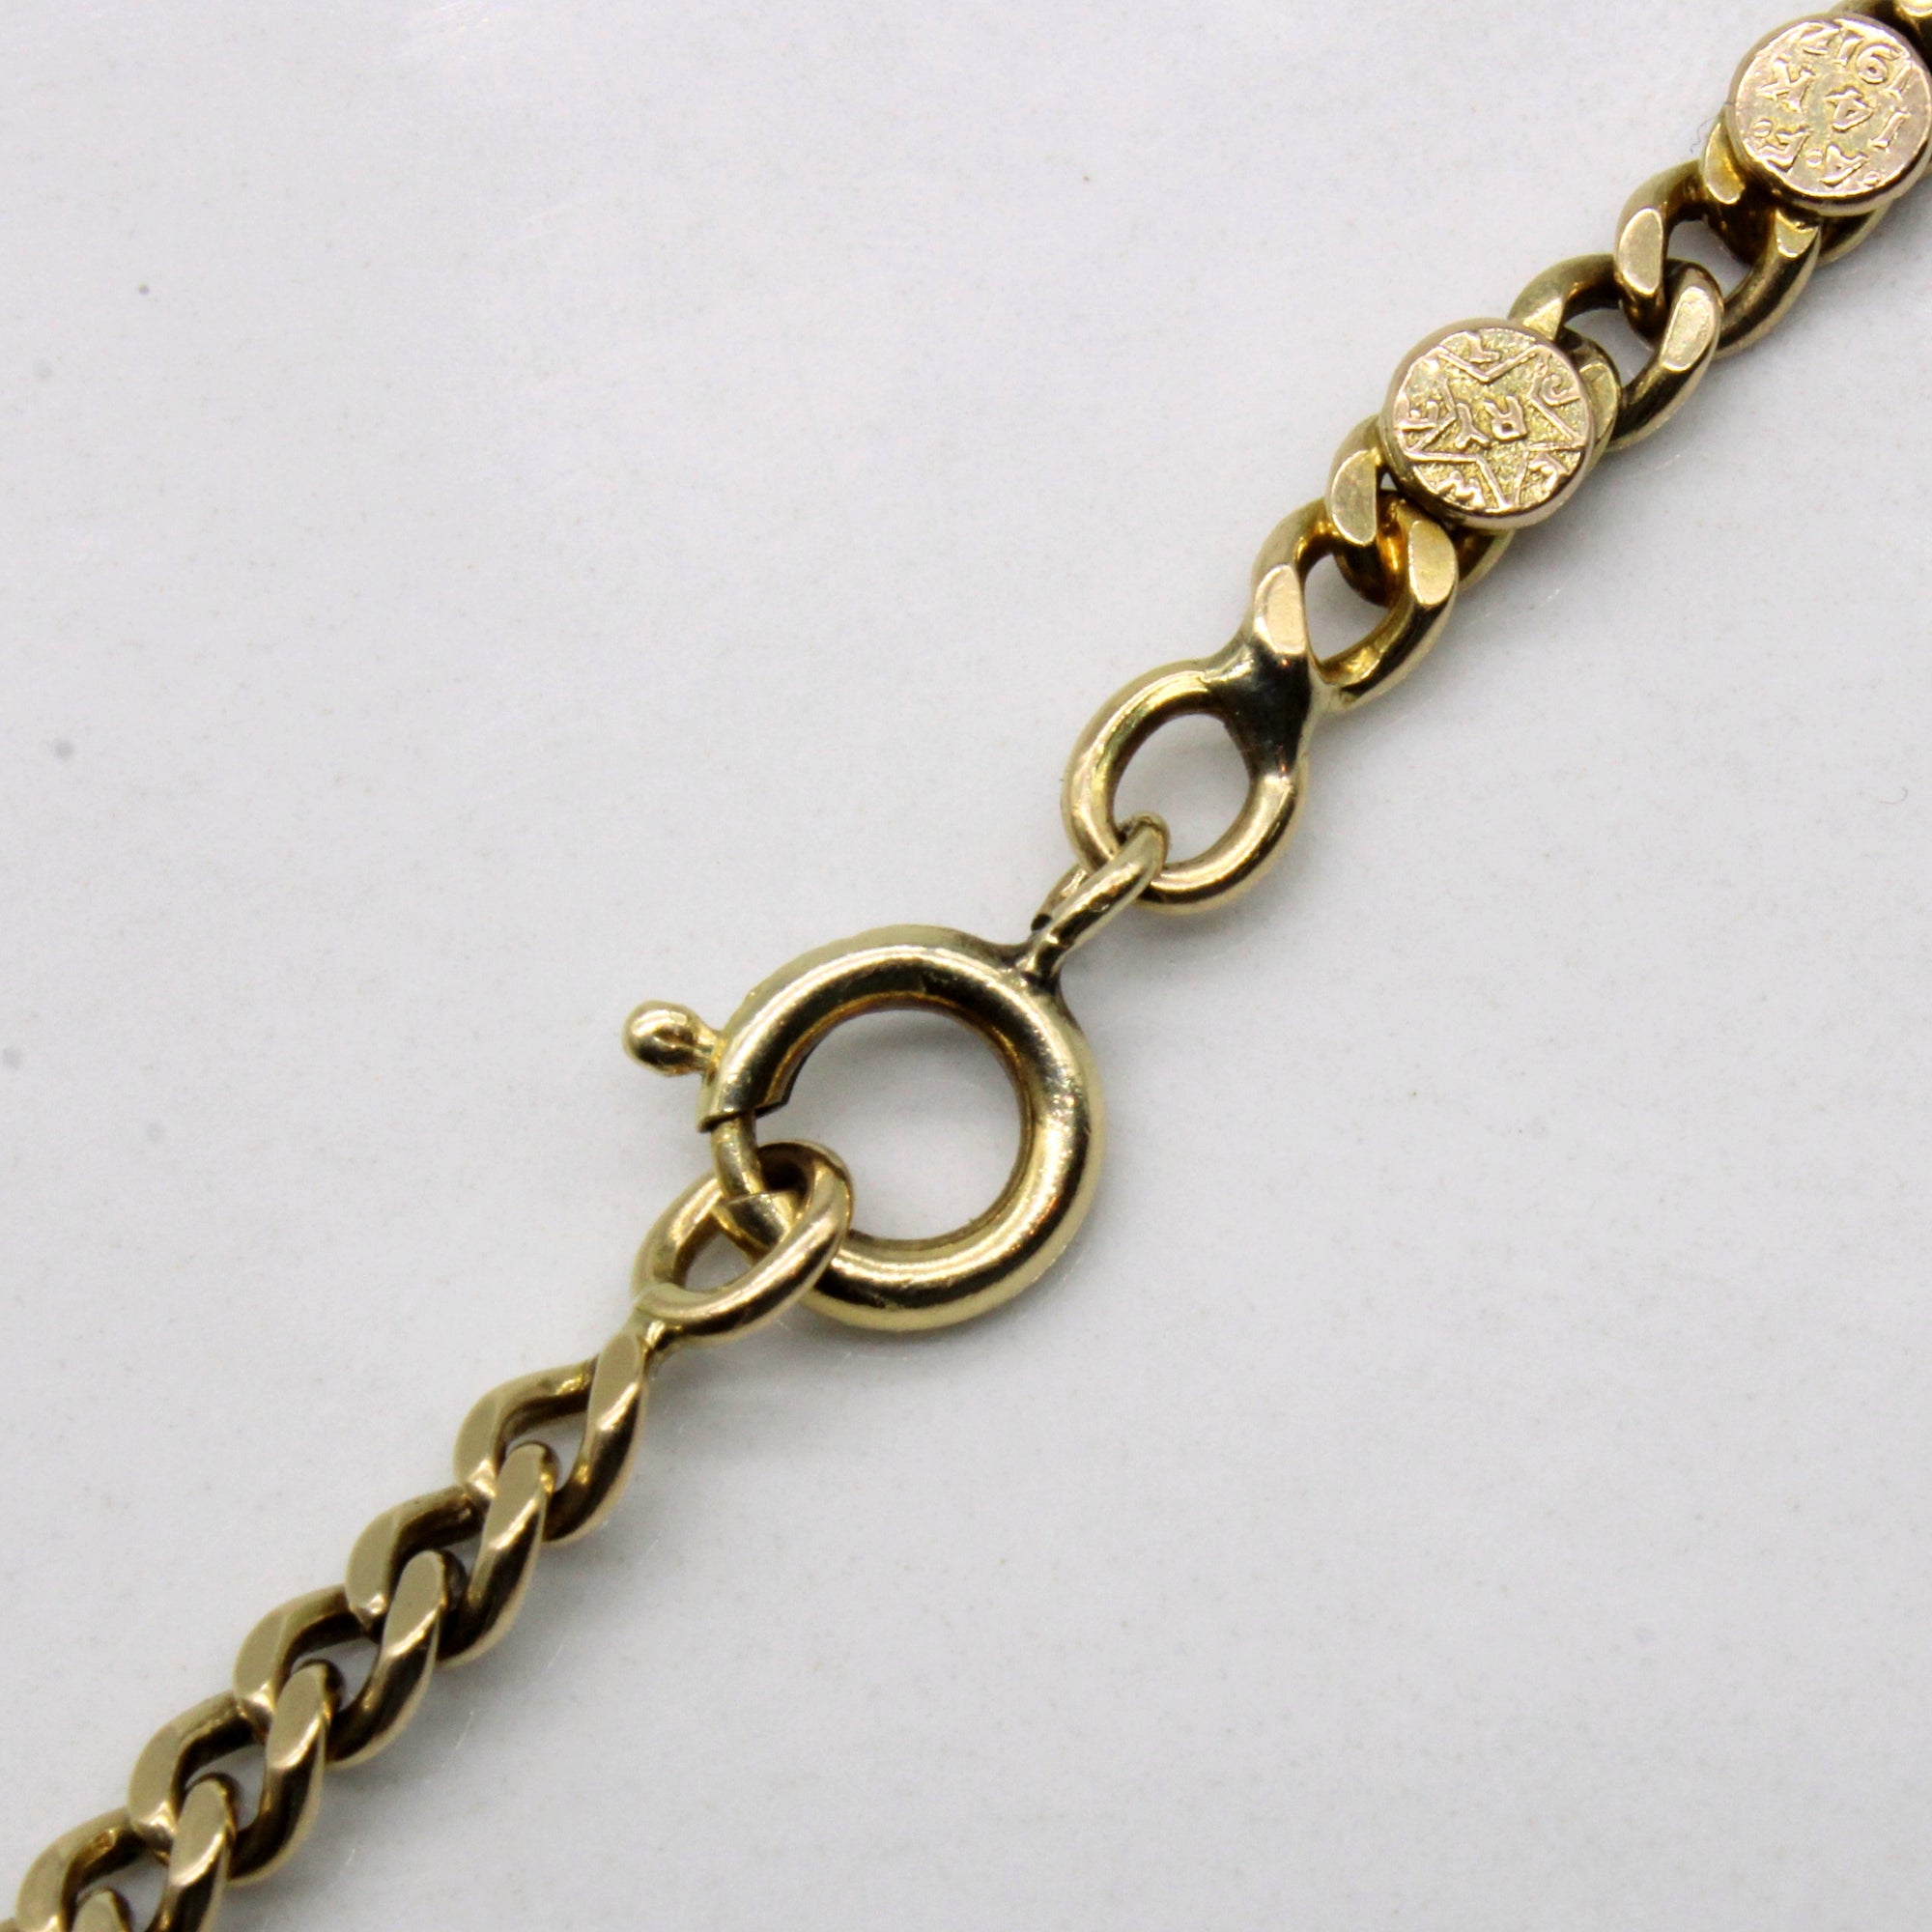 14k Yellow Gold Curb Link Chain | 48